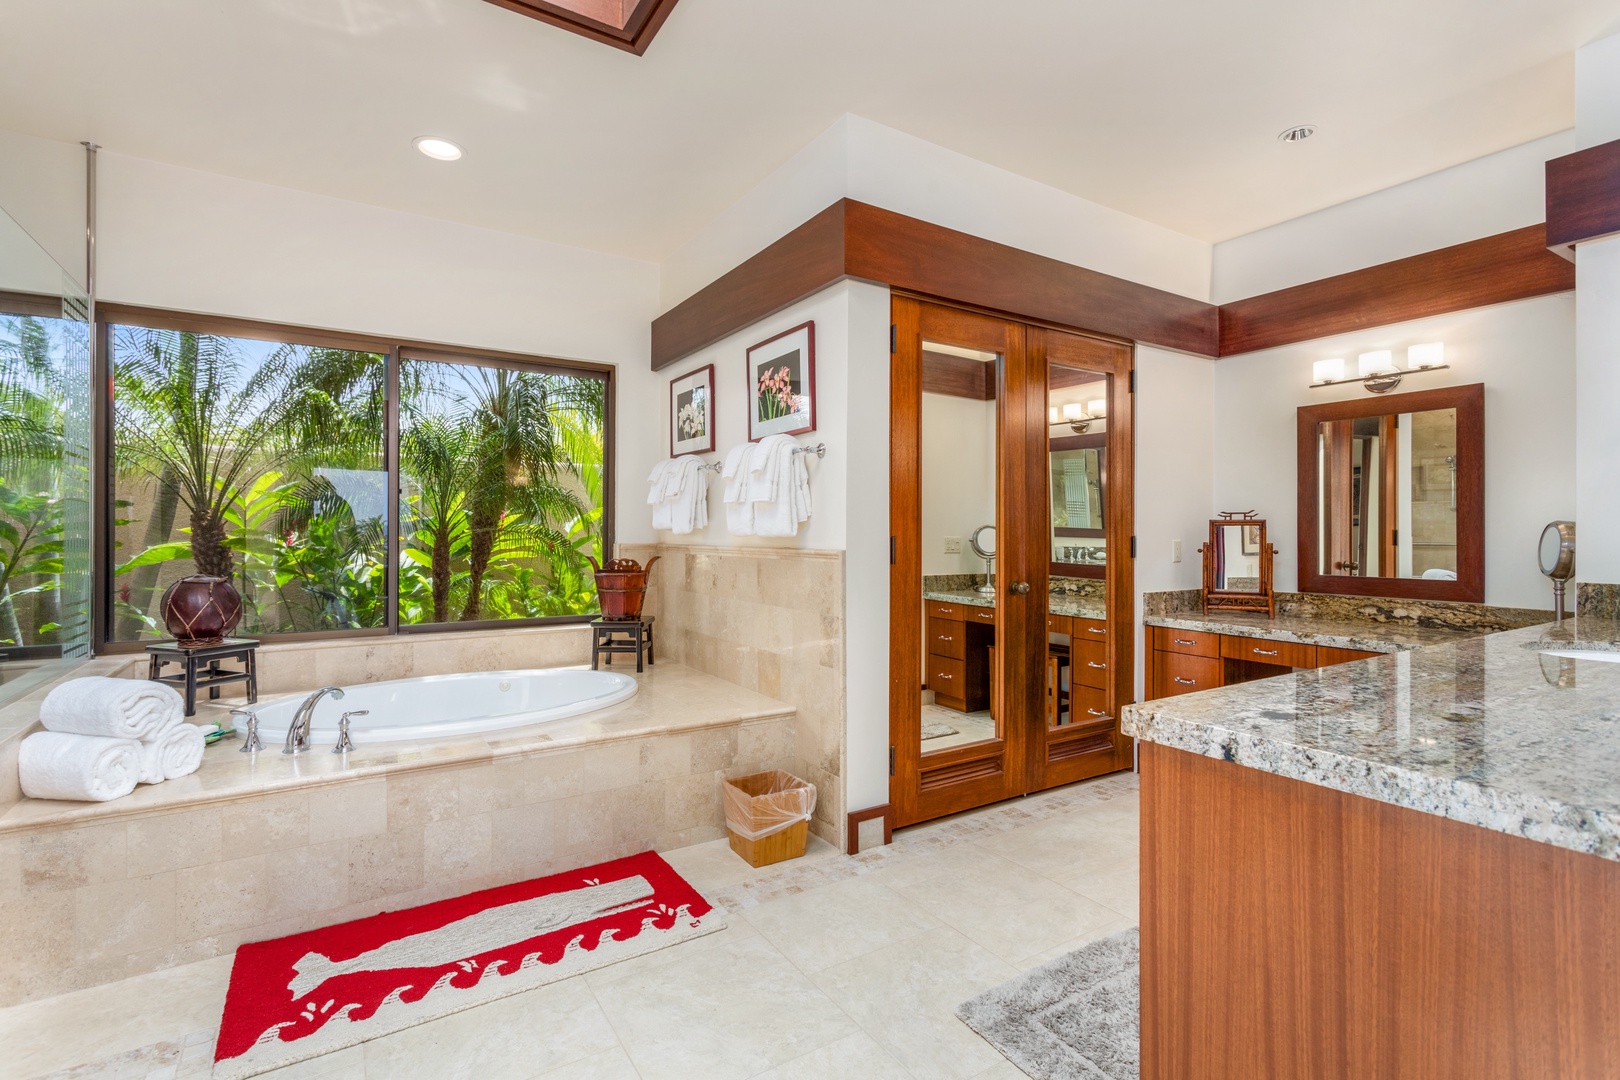 Kamuela Vacation Rentals, OFB 3BD Villas (39) at Mauna Kea Resort - Primary bathroom with soaking tub, dual vanity, walk-in shower, and separate commode for privacy.